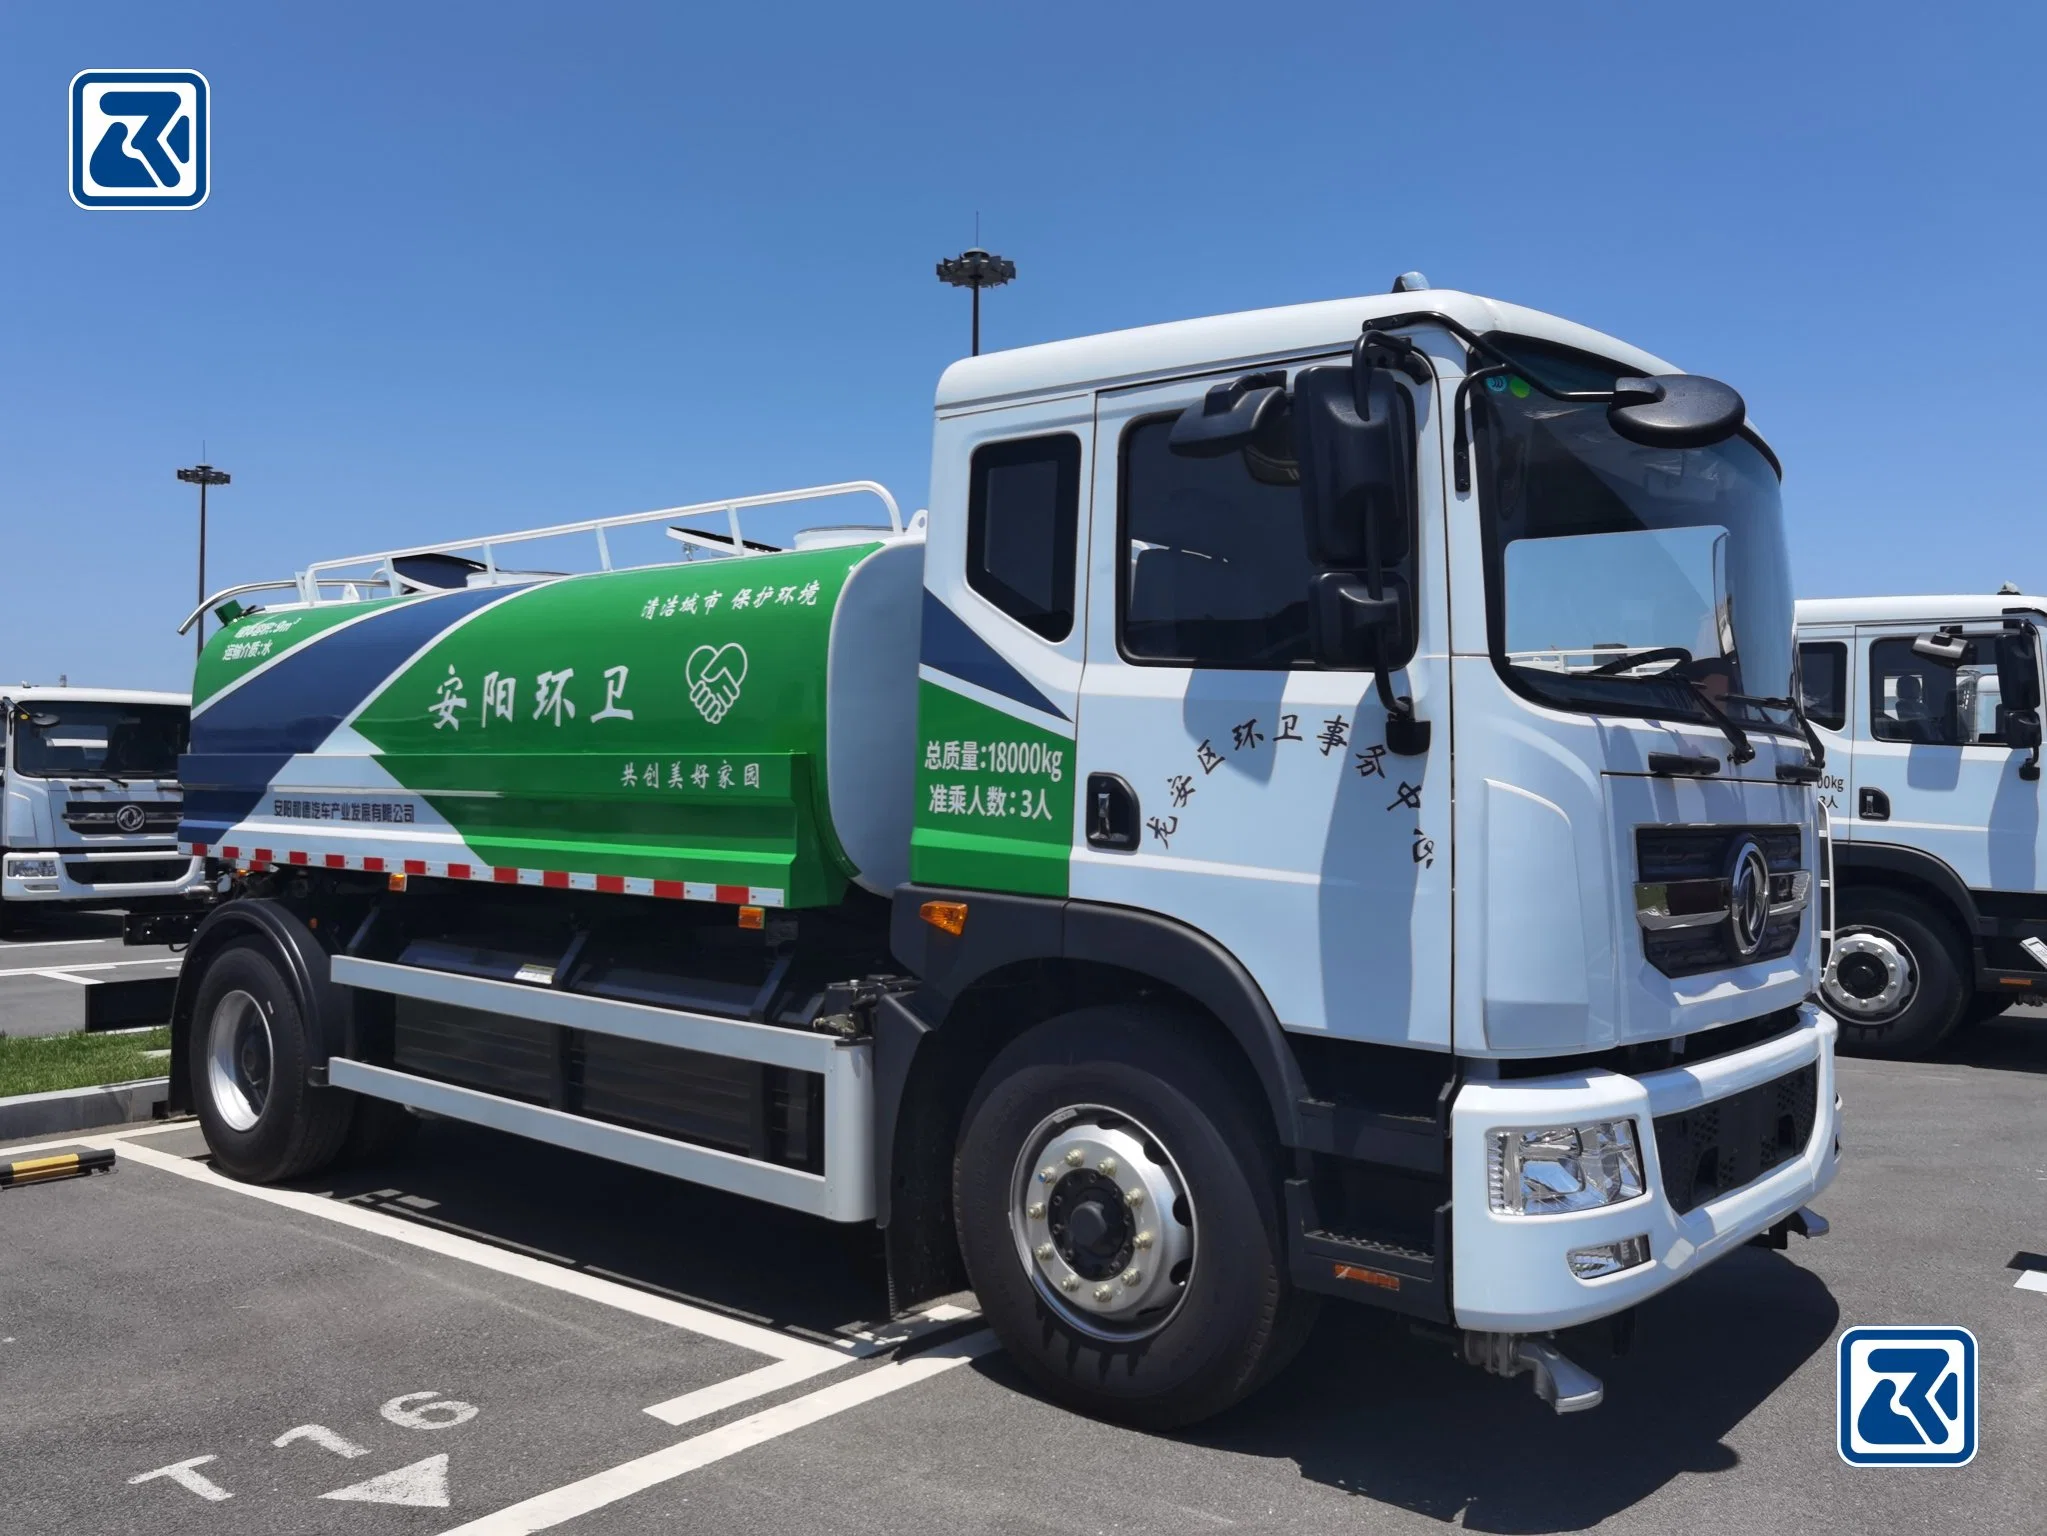 Electric Vehicles Brand New Dongfeng Sanition Trucks City Electrical Water Sprinkler Truck